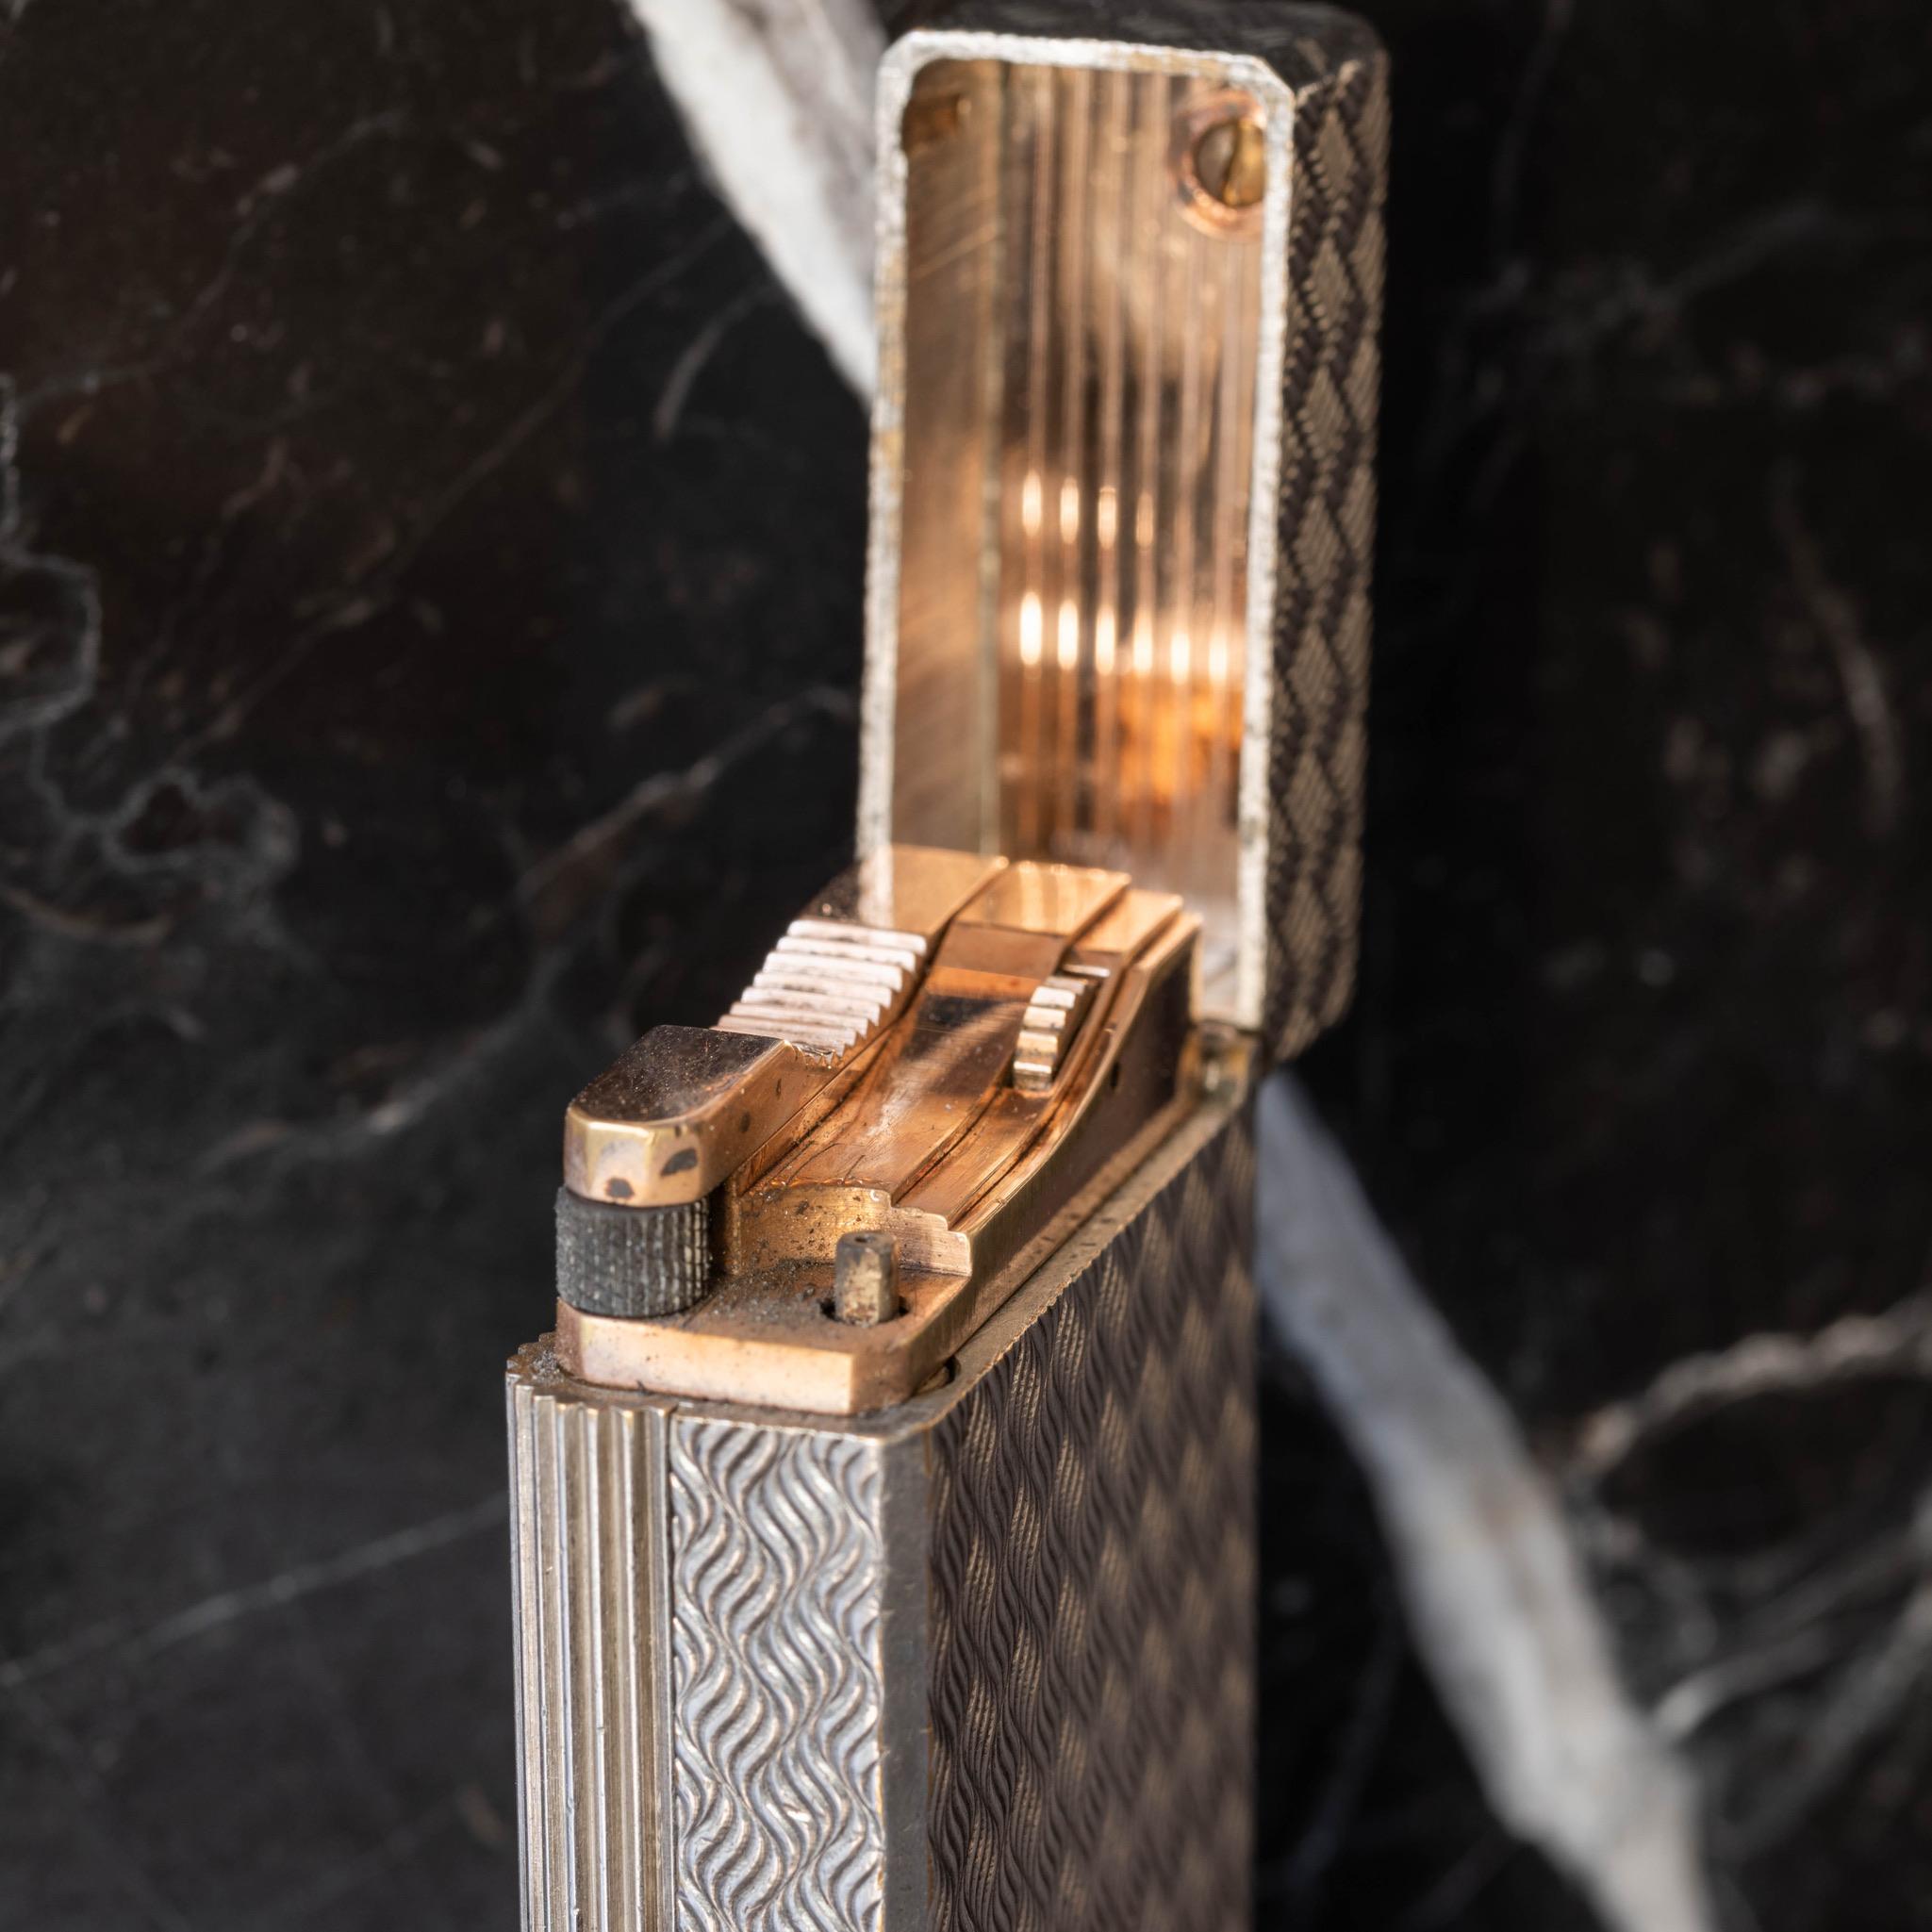 Rare 1960's Dupont Hermès special edition silver plated Ligne 1 gas lighter with engraved ‘wave' decoration.

Each Dupont has a serial number unique to that particular lighter. This example is marked on the base, ’S.T Dupont - Hermès - Paris' - with